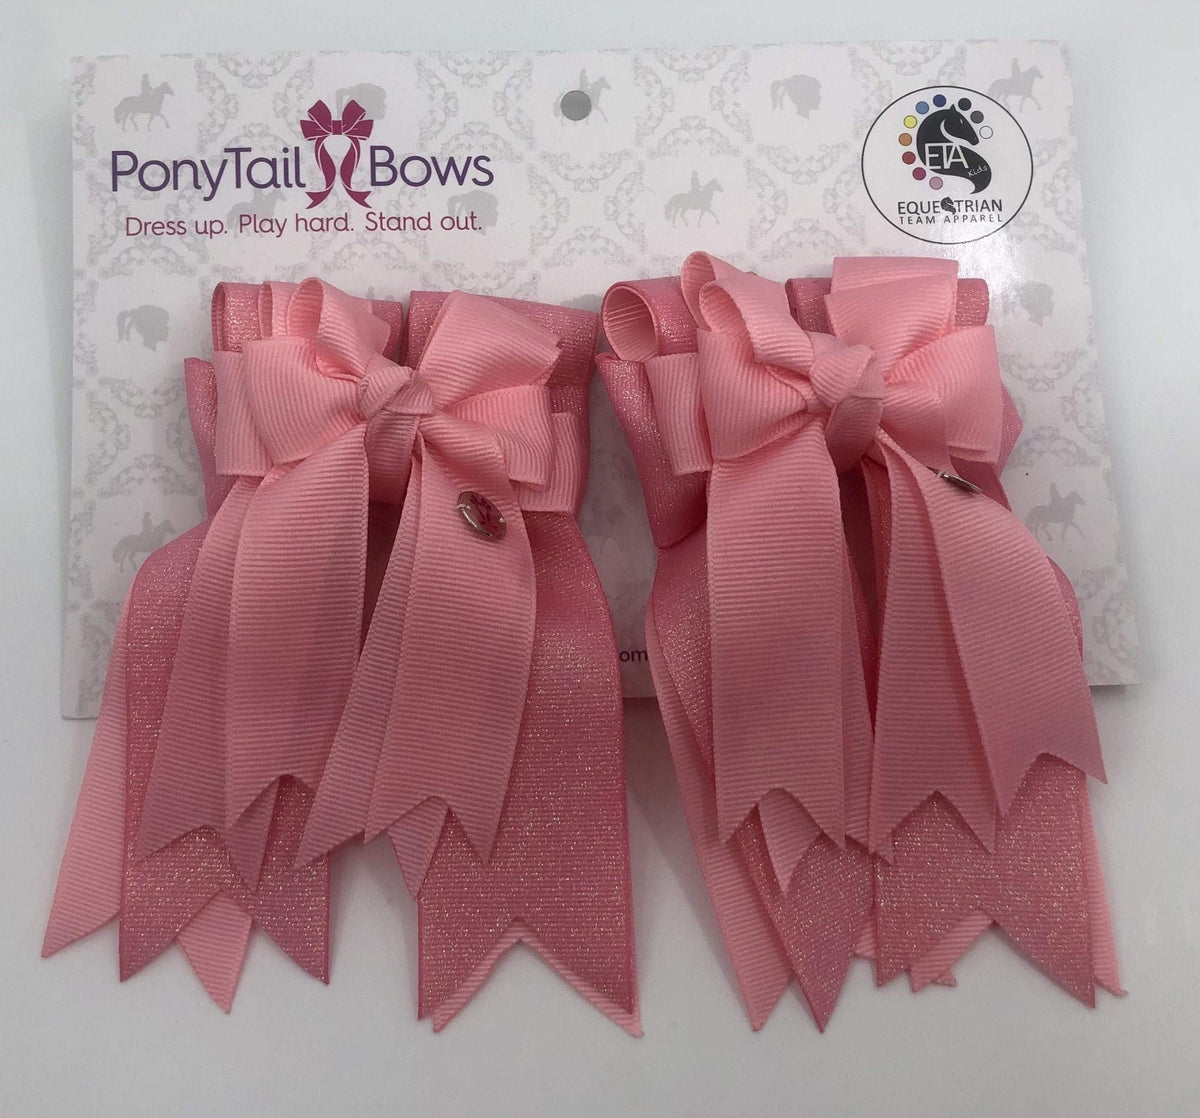 PonyTail Bows 3" Tails Bubble Gum PonyTail Bows equestrian team apparel online tack store mobile tack store custom farm apparel custom show stable clothing equestrian lifestyle horse show clothing riding clothes Abbie Horse Show Bows | PonyTail Bows | Equestrian Hair Accessories horses equestrian tack store